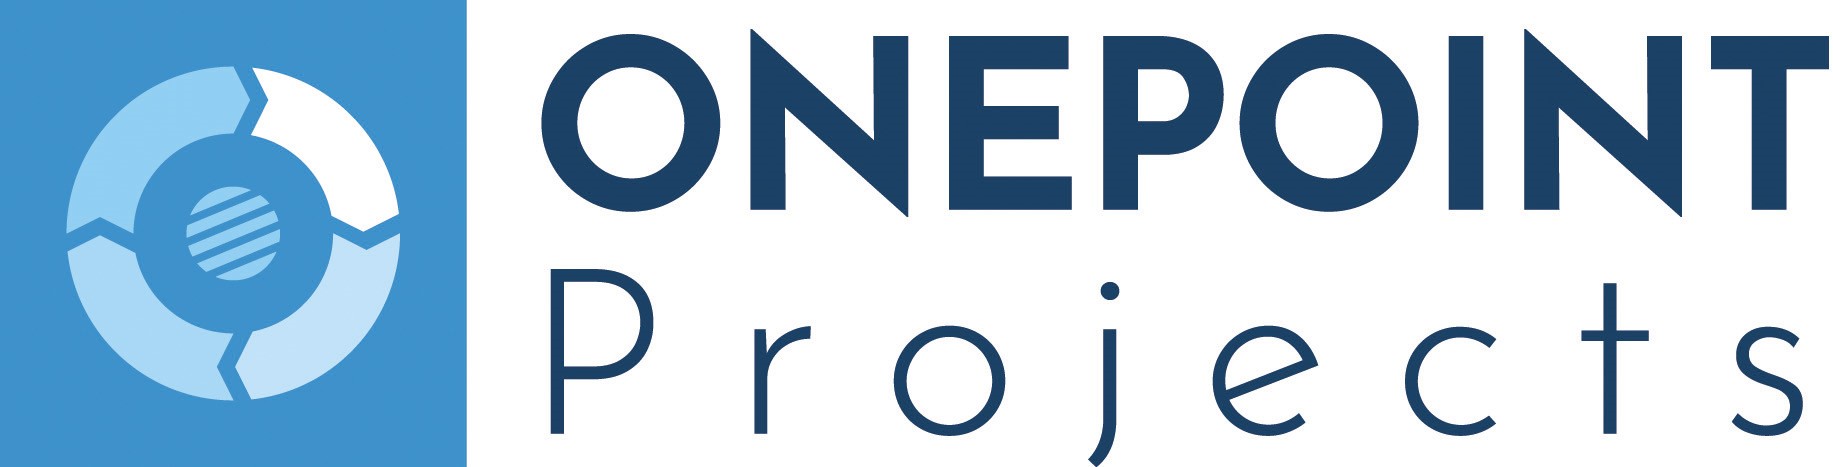 ONEPOINT Projects